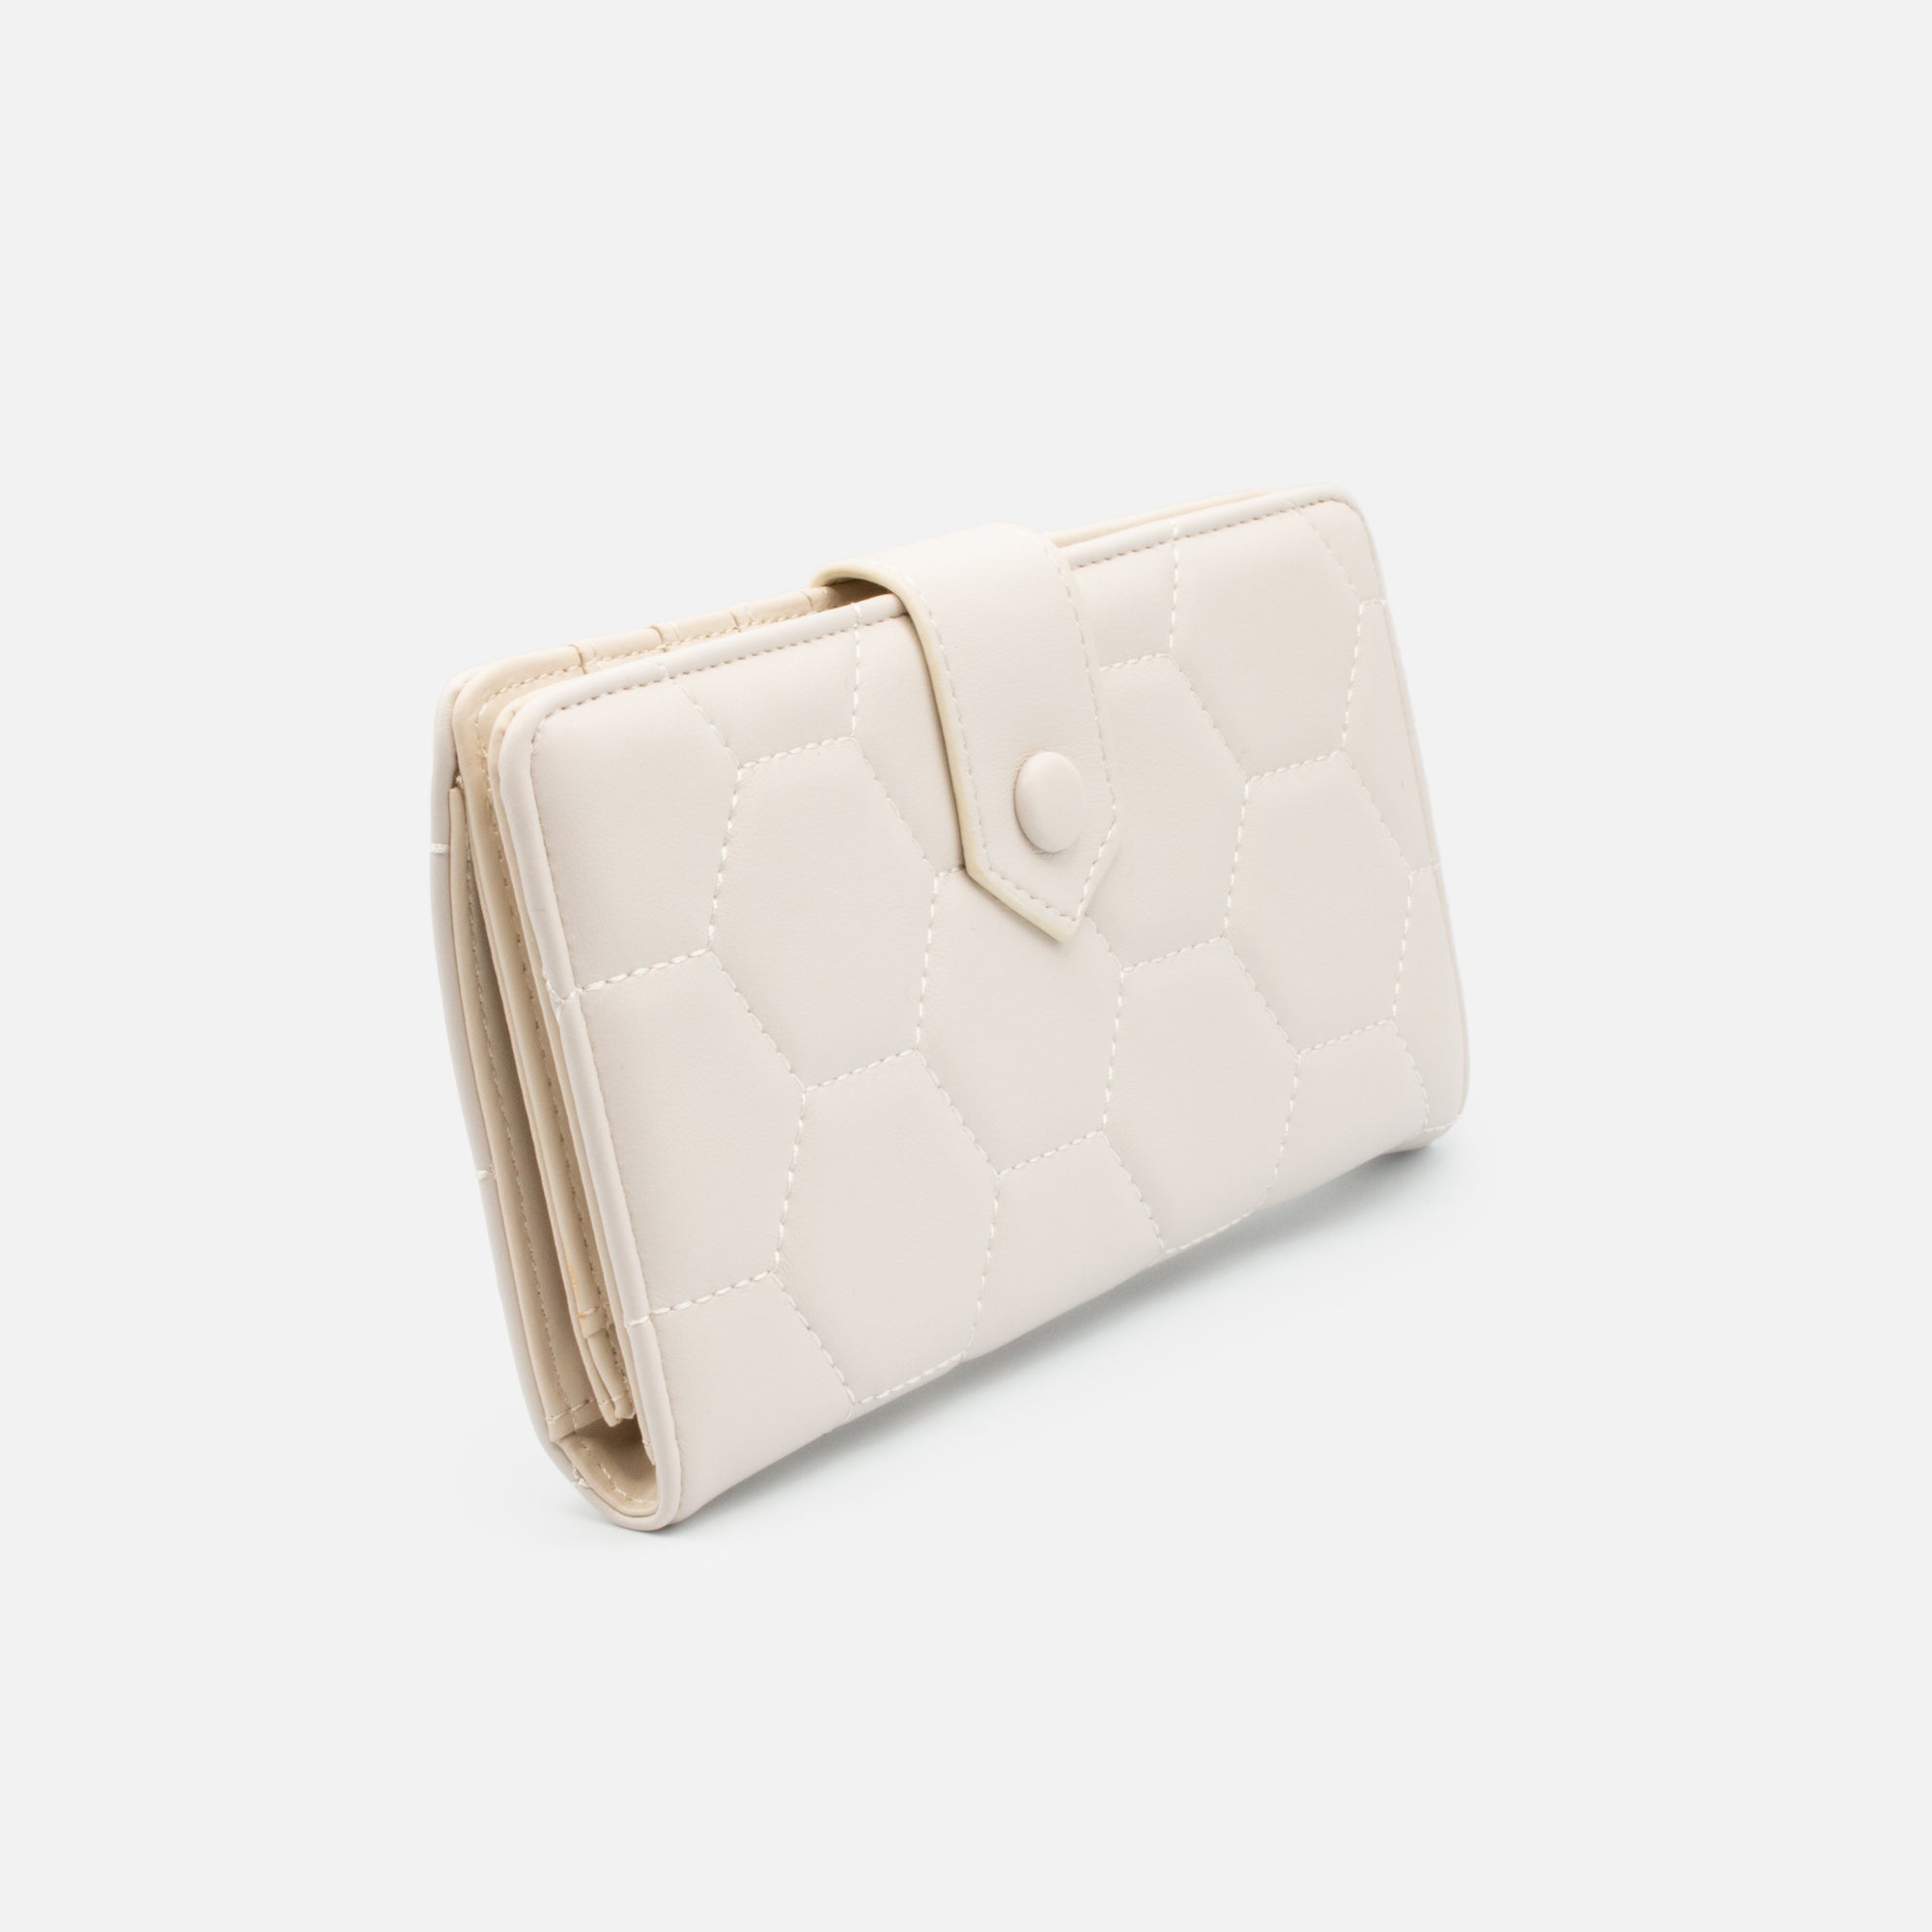 Ivory wallet quilted with hexagonal patterns